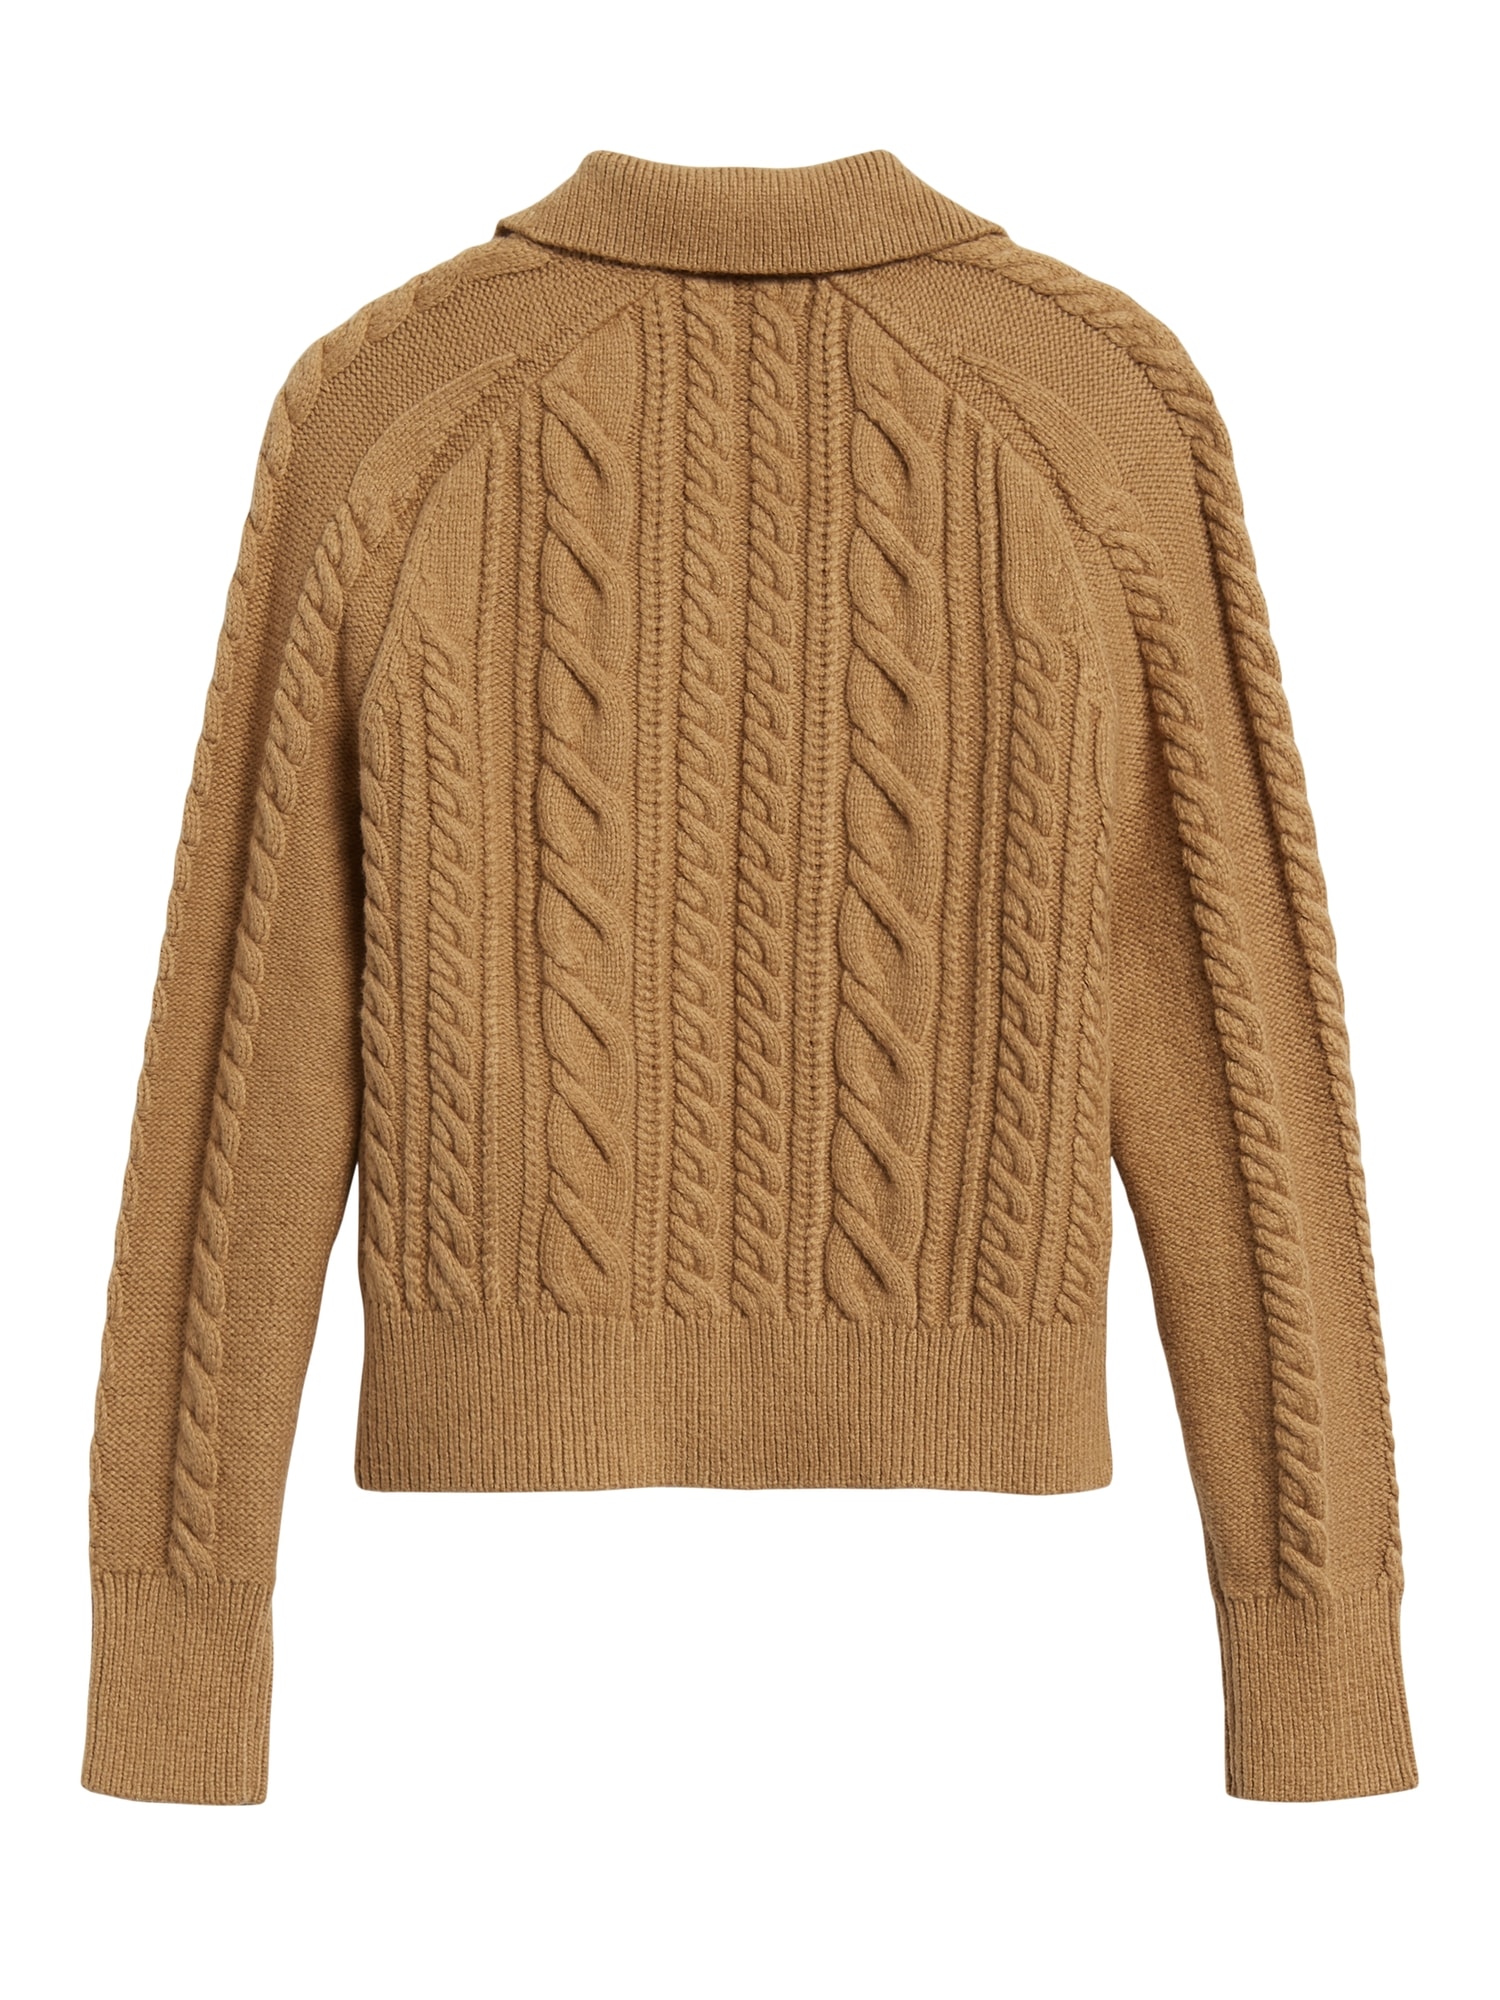 Heritage Cable-Knit Cardigan Sweater